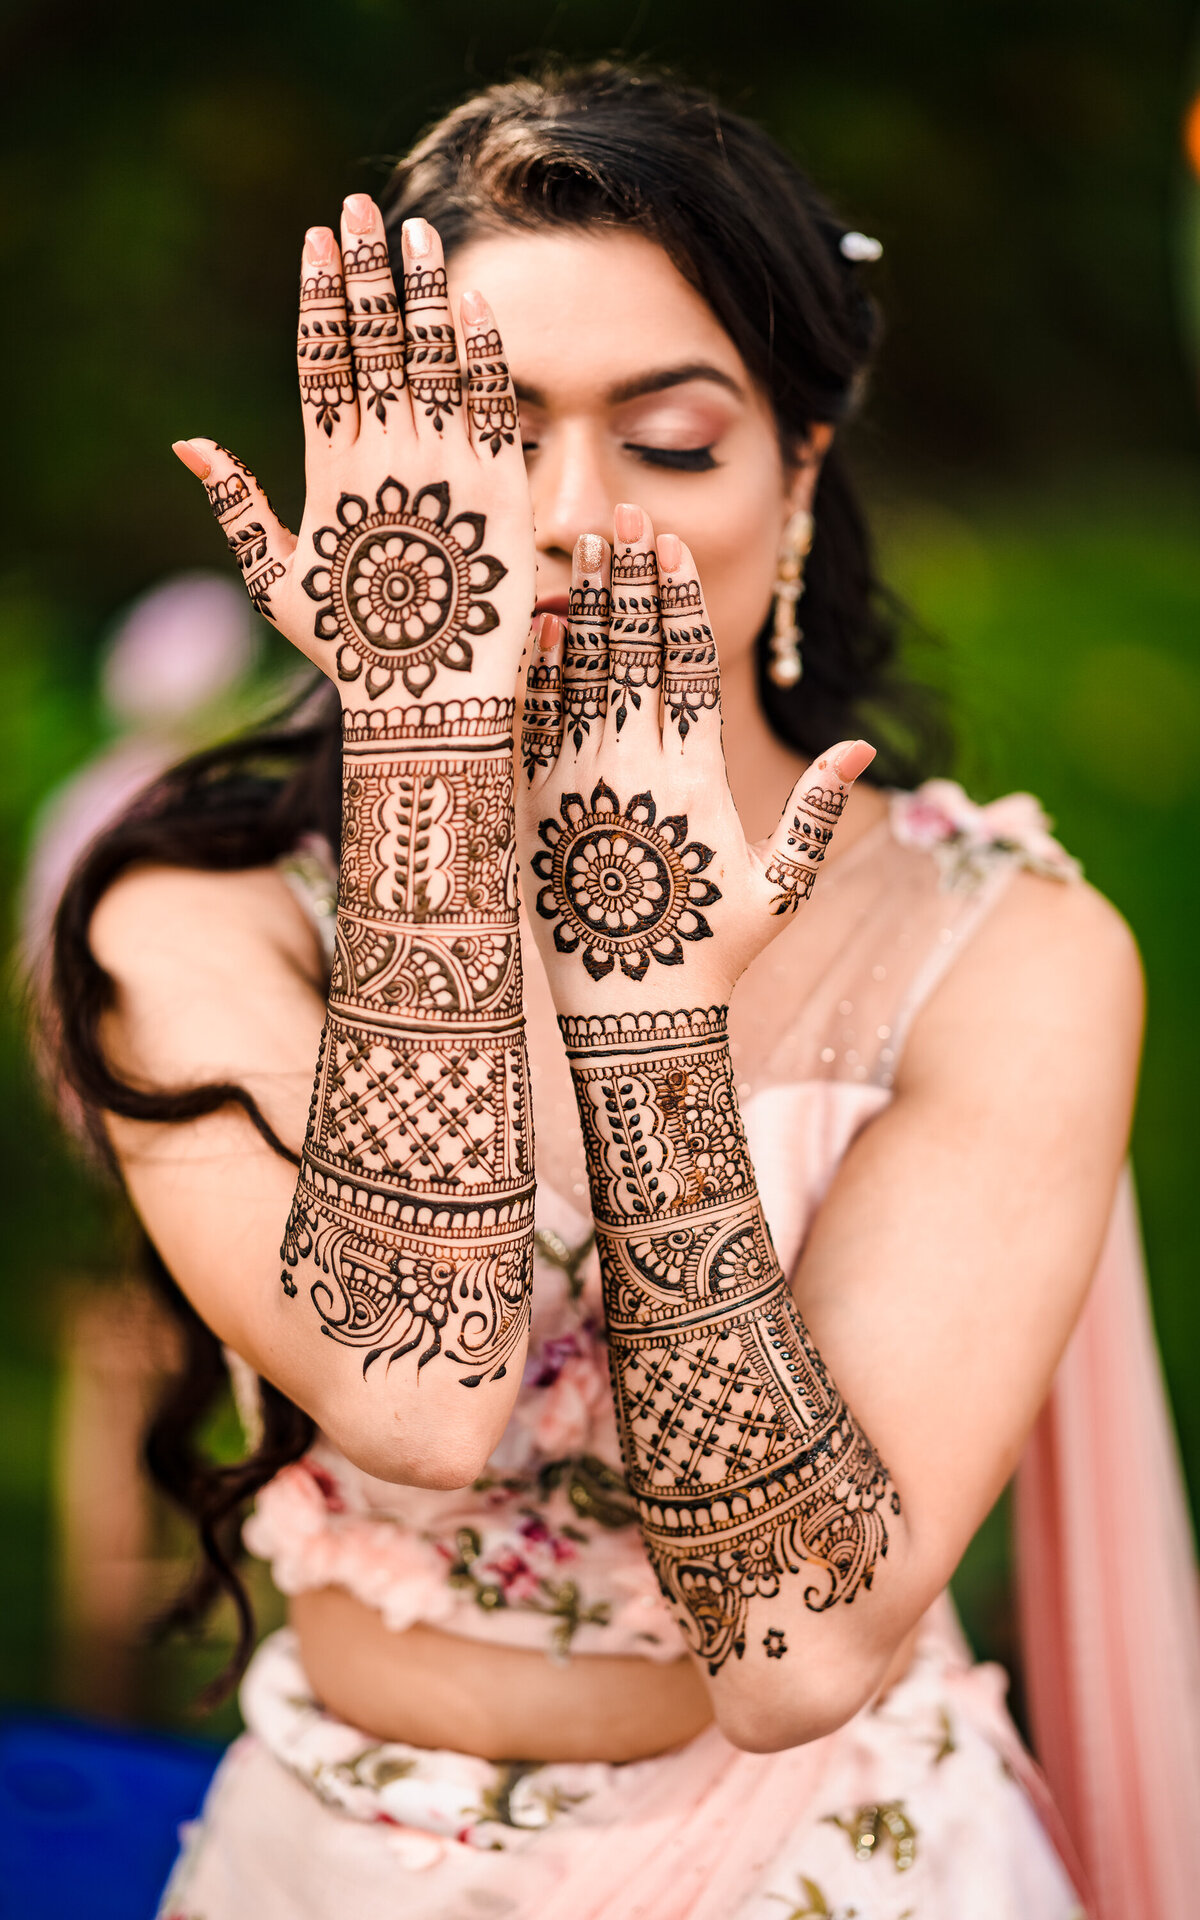 Capture your Edison wedding with beautiful photography by Ishan Fotografi.